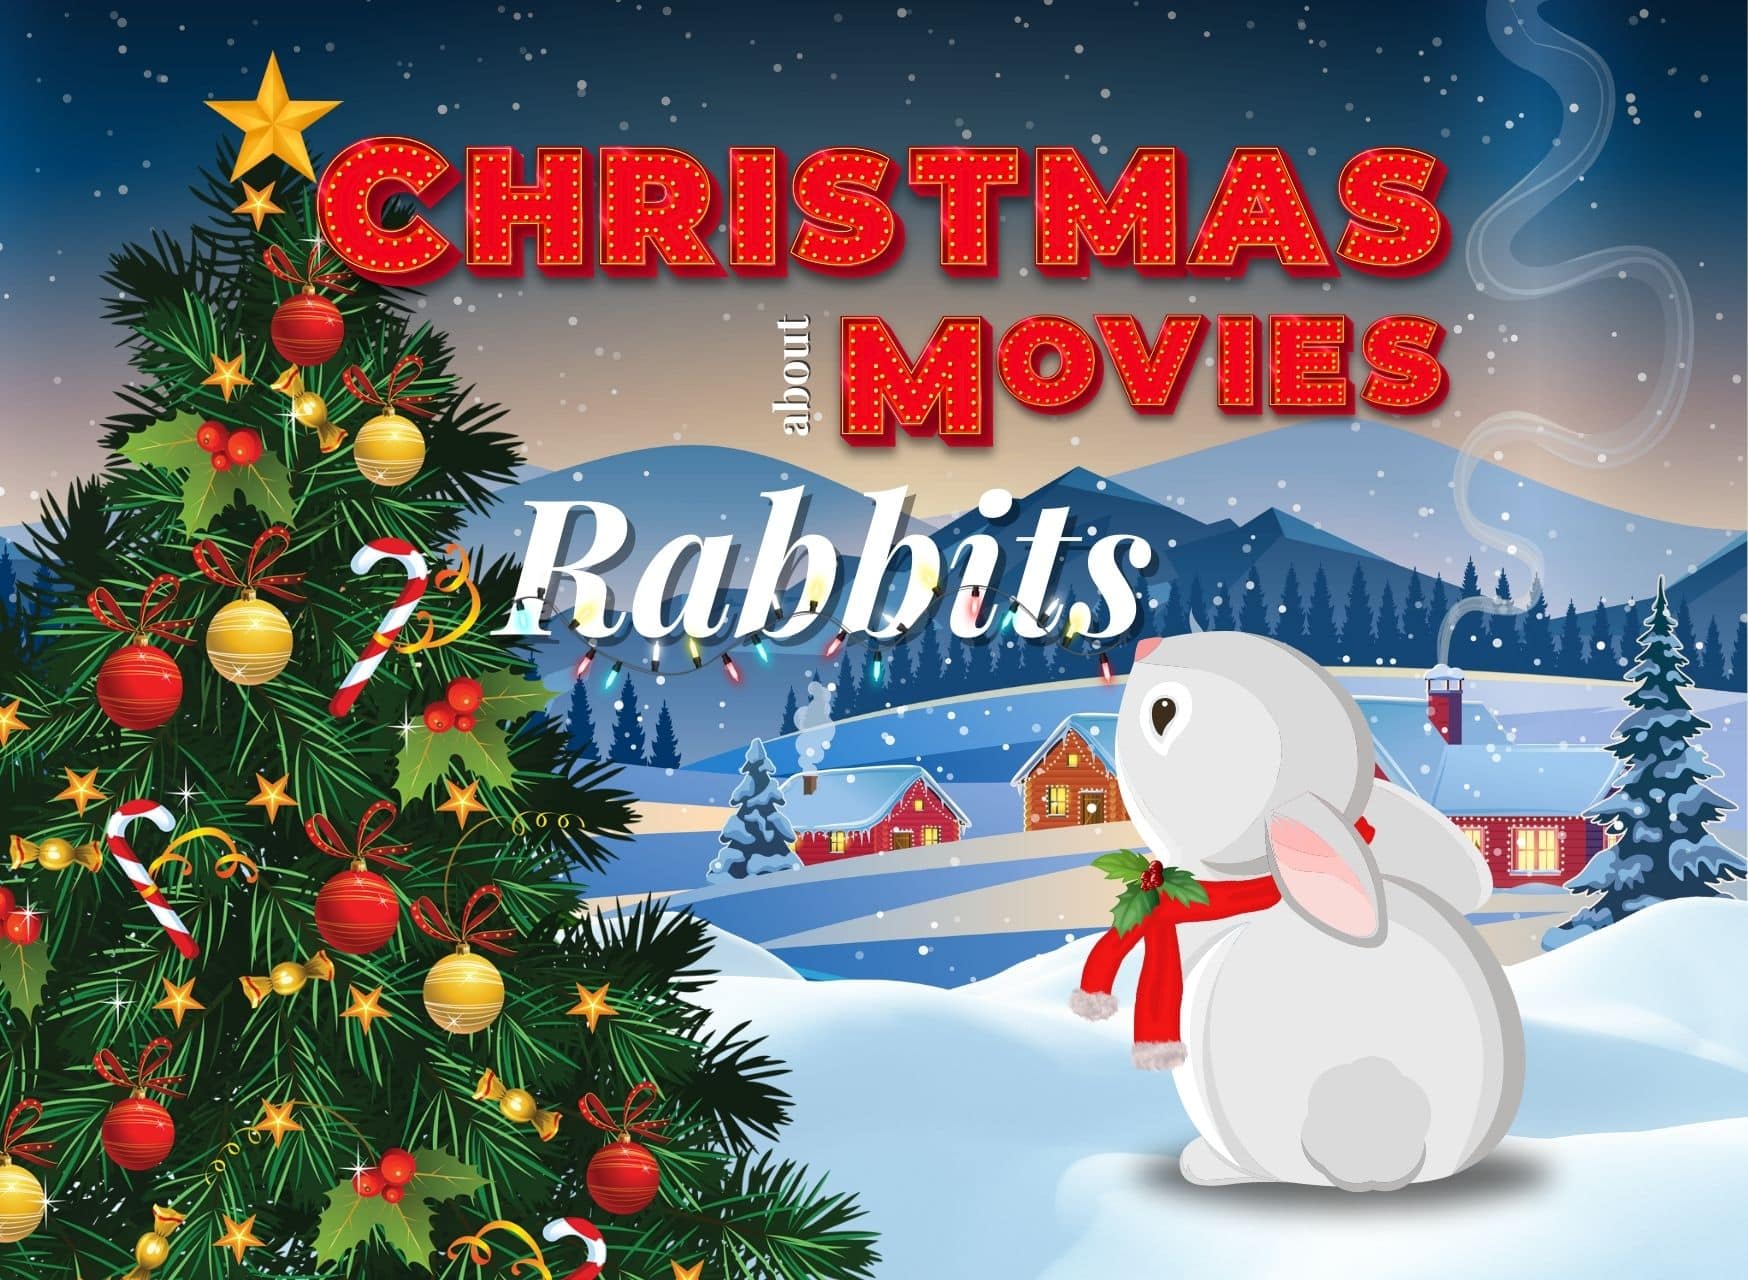 movies about rabbits, best christmas movies, Christmas movies night